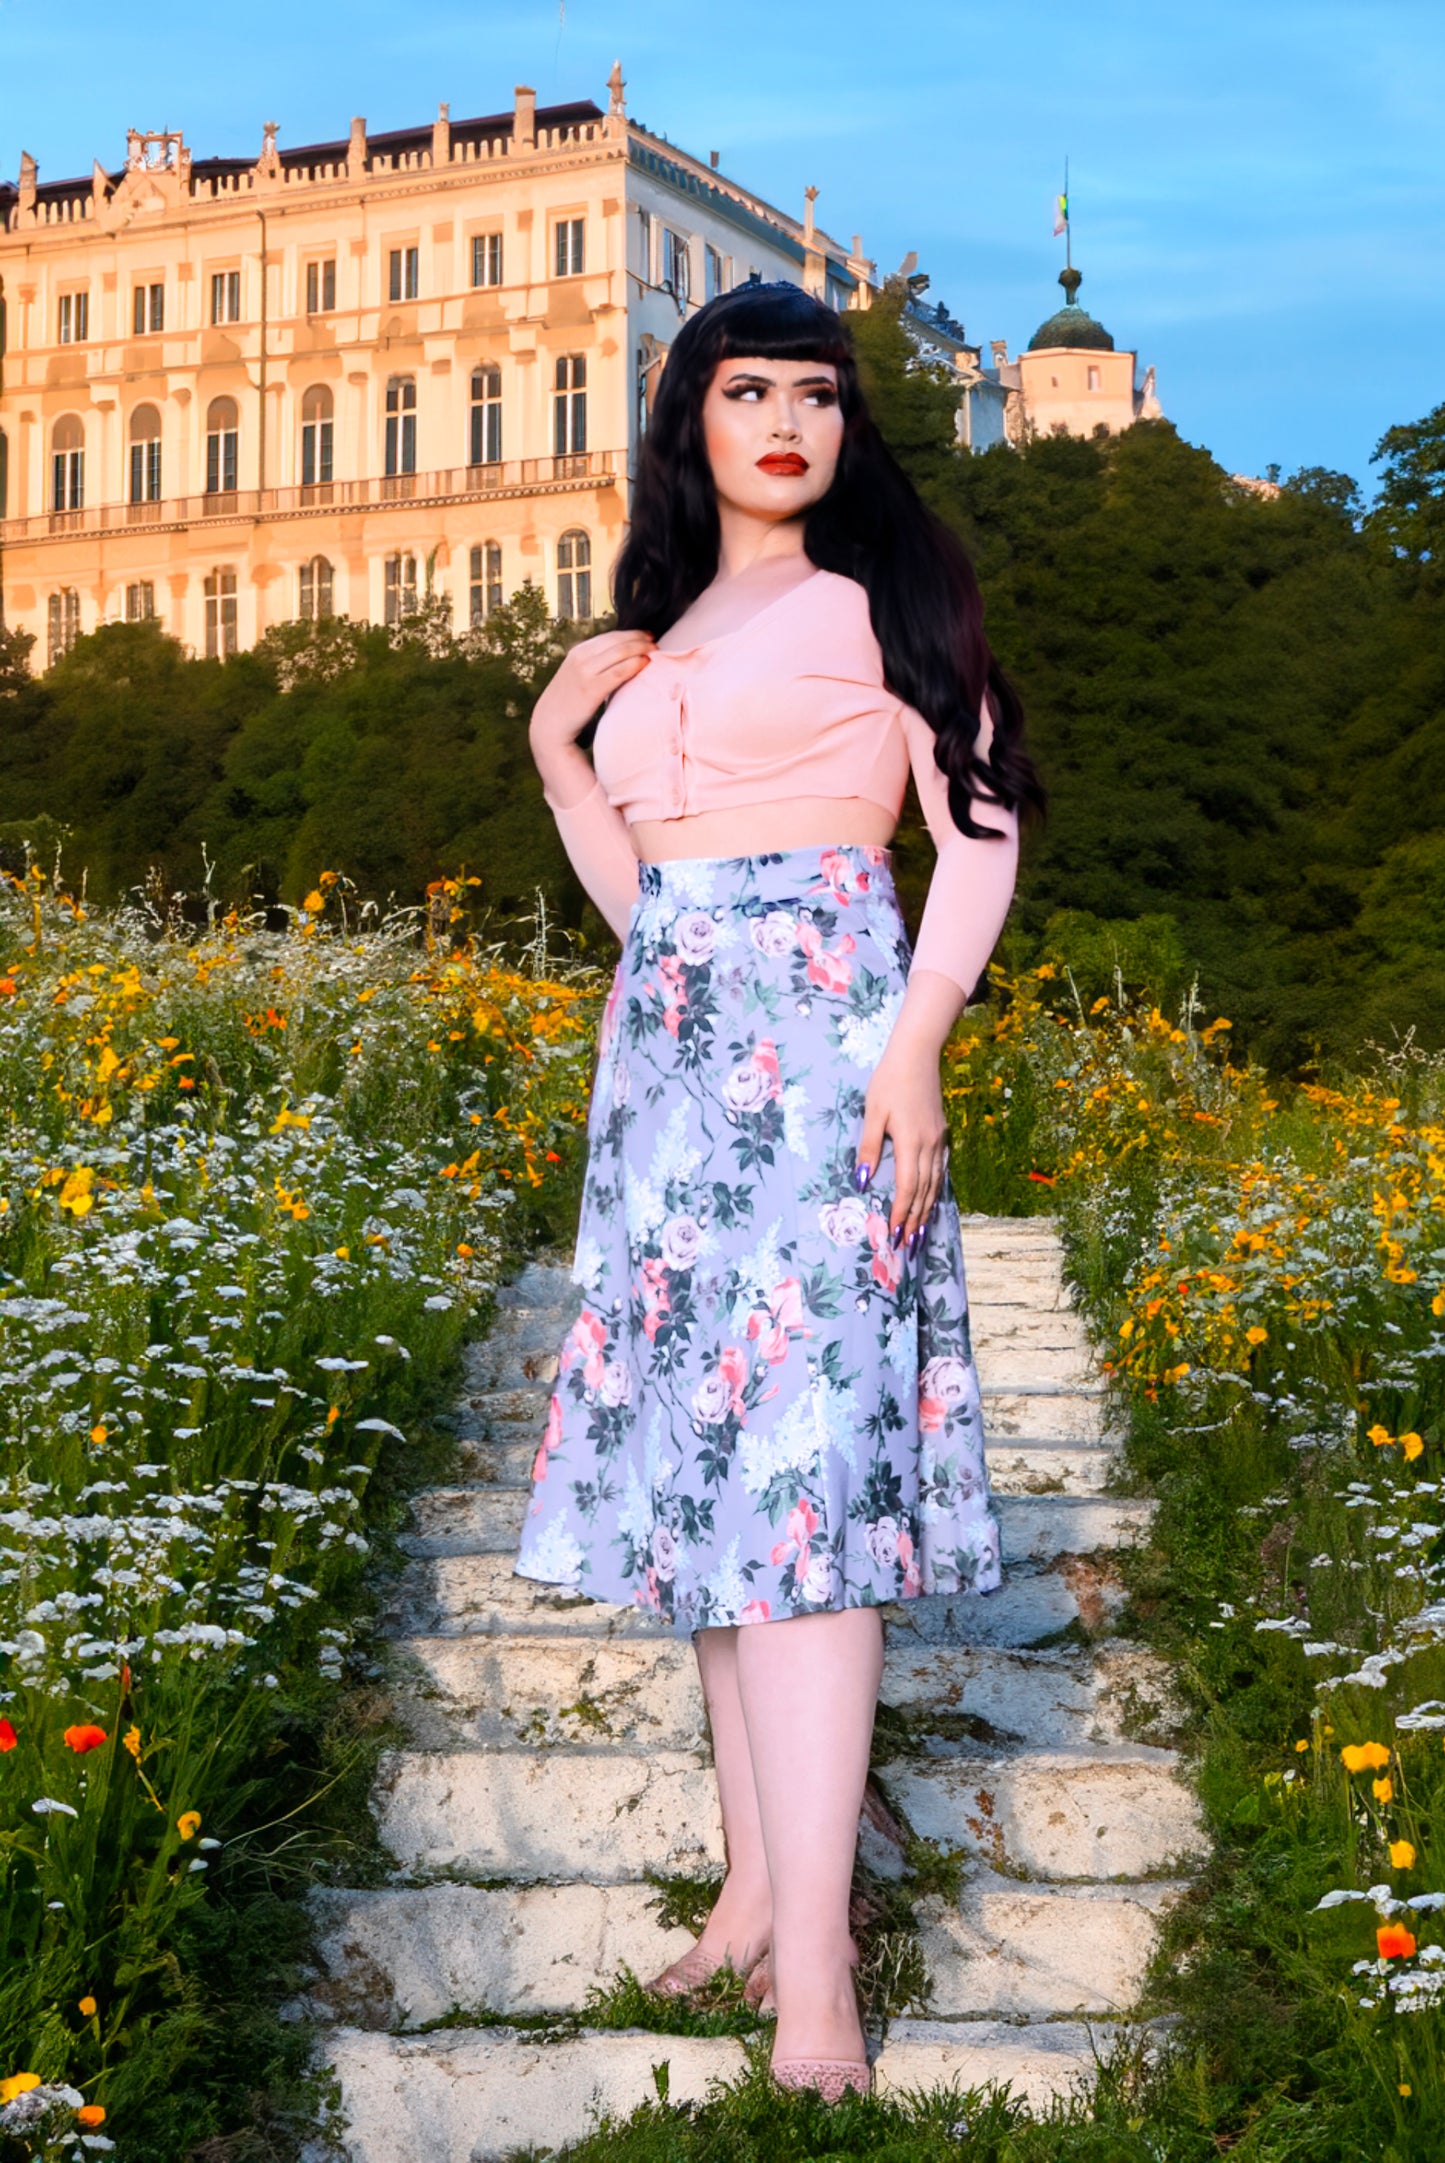 Final Sale - Viva Skirt in J'adore Paris Grey Bella Roses Stretch Crepe | Pinup Couture